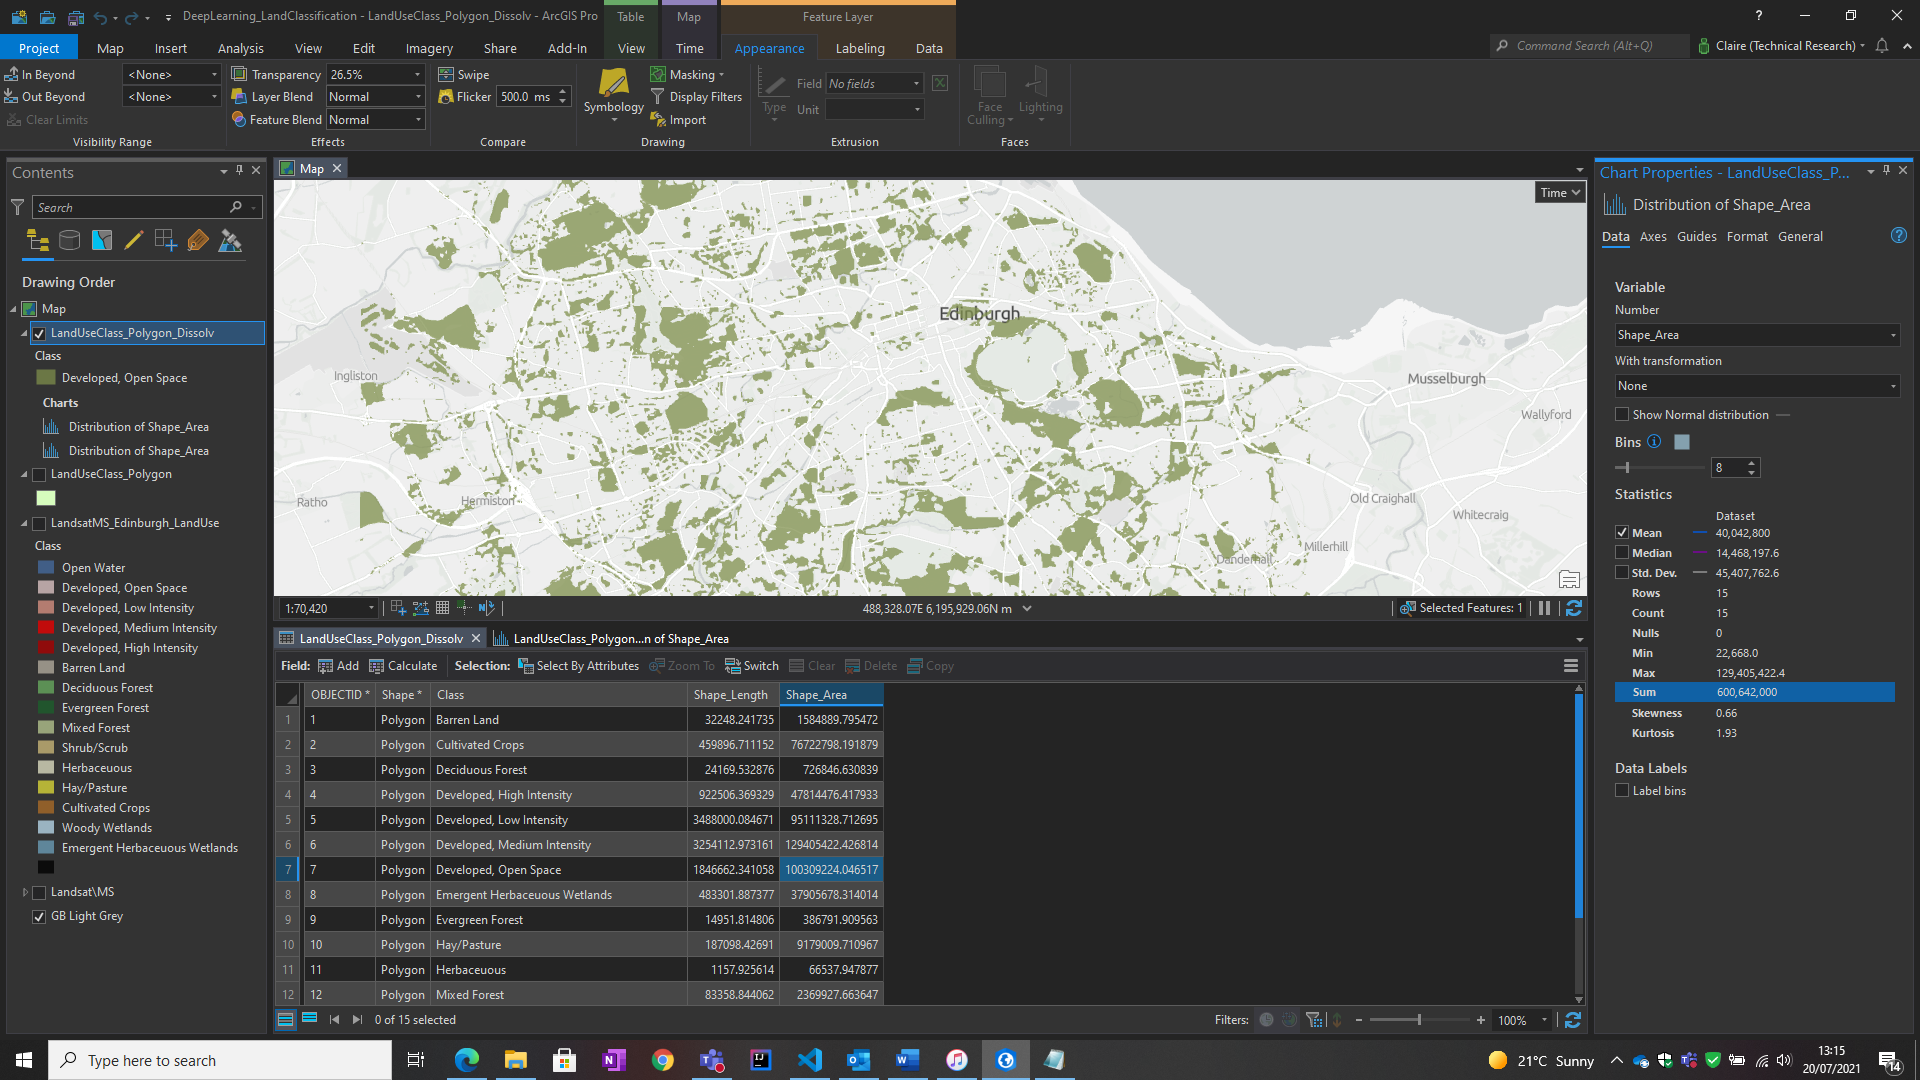 Land classification results extracted to polygons in ArcGIS Pro